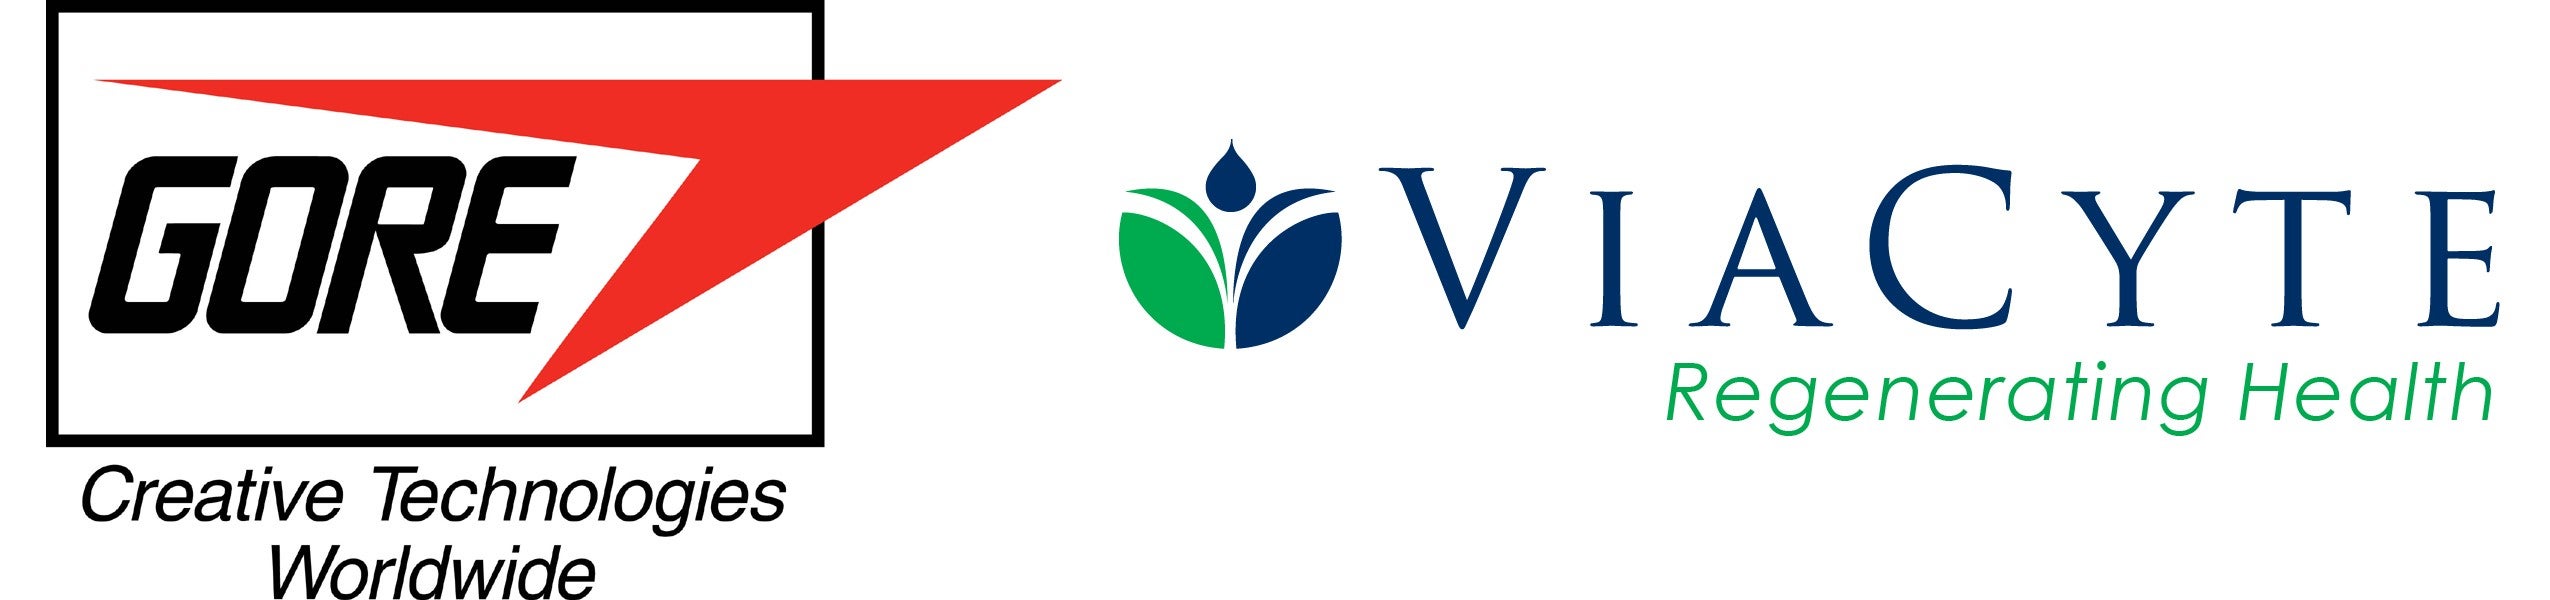 Logos of Gore and ViaCyte